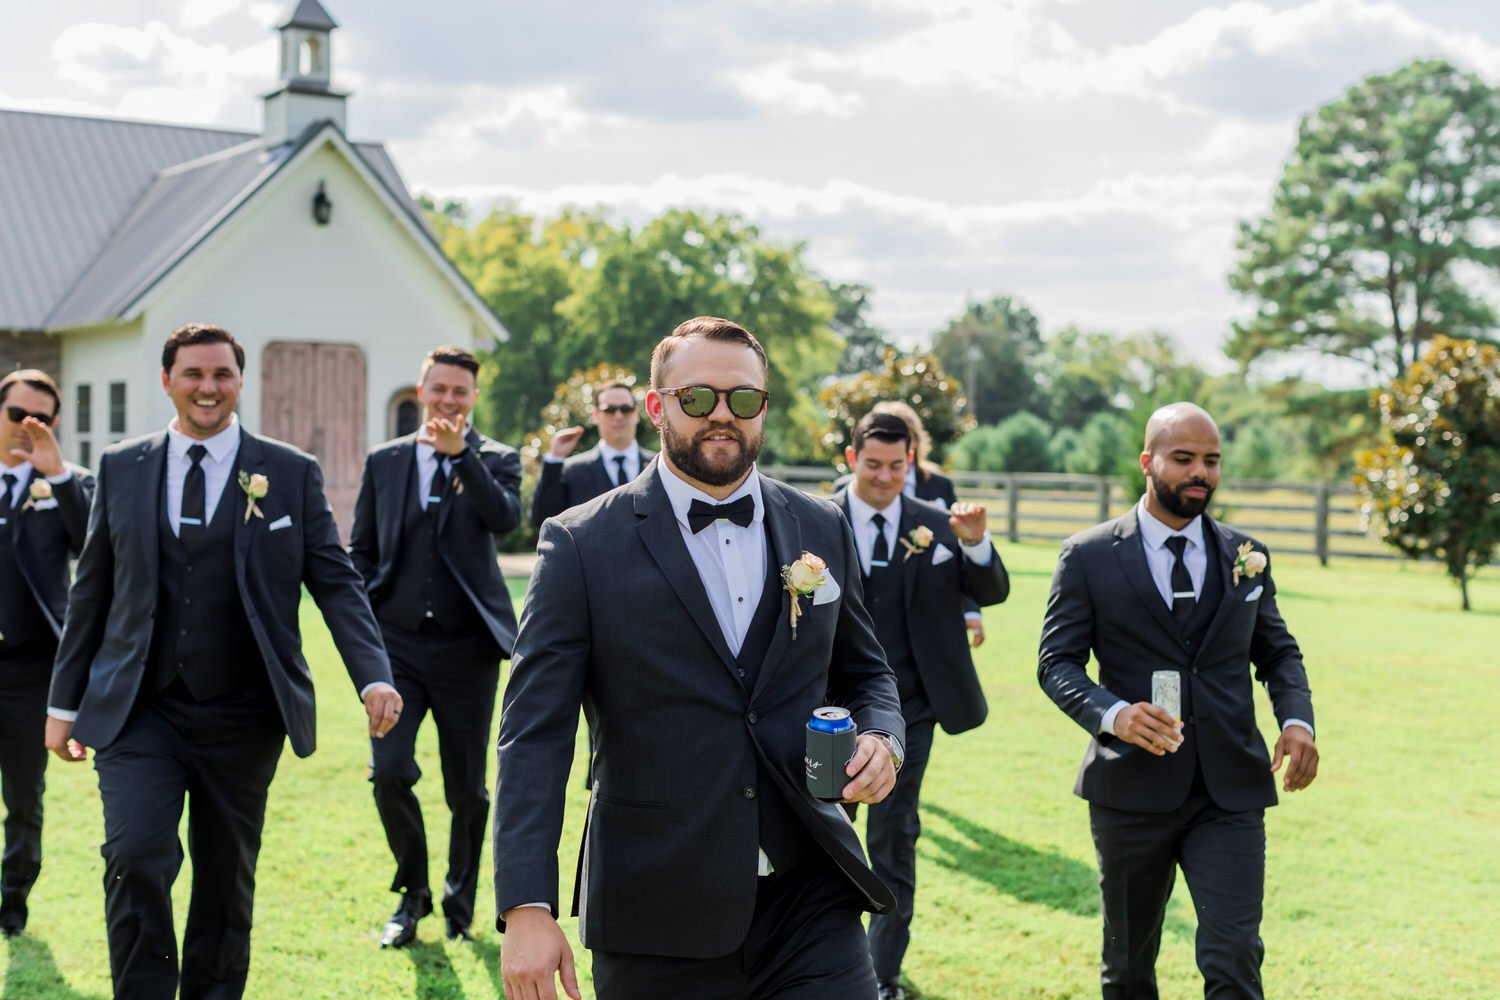 Murfreesboro-middle-tennessee-wedding-elopement-Monocle-Project-8.jpg